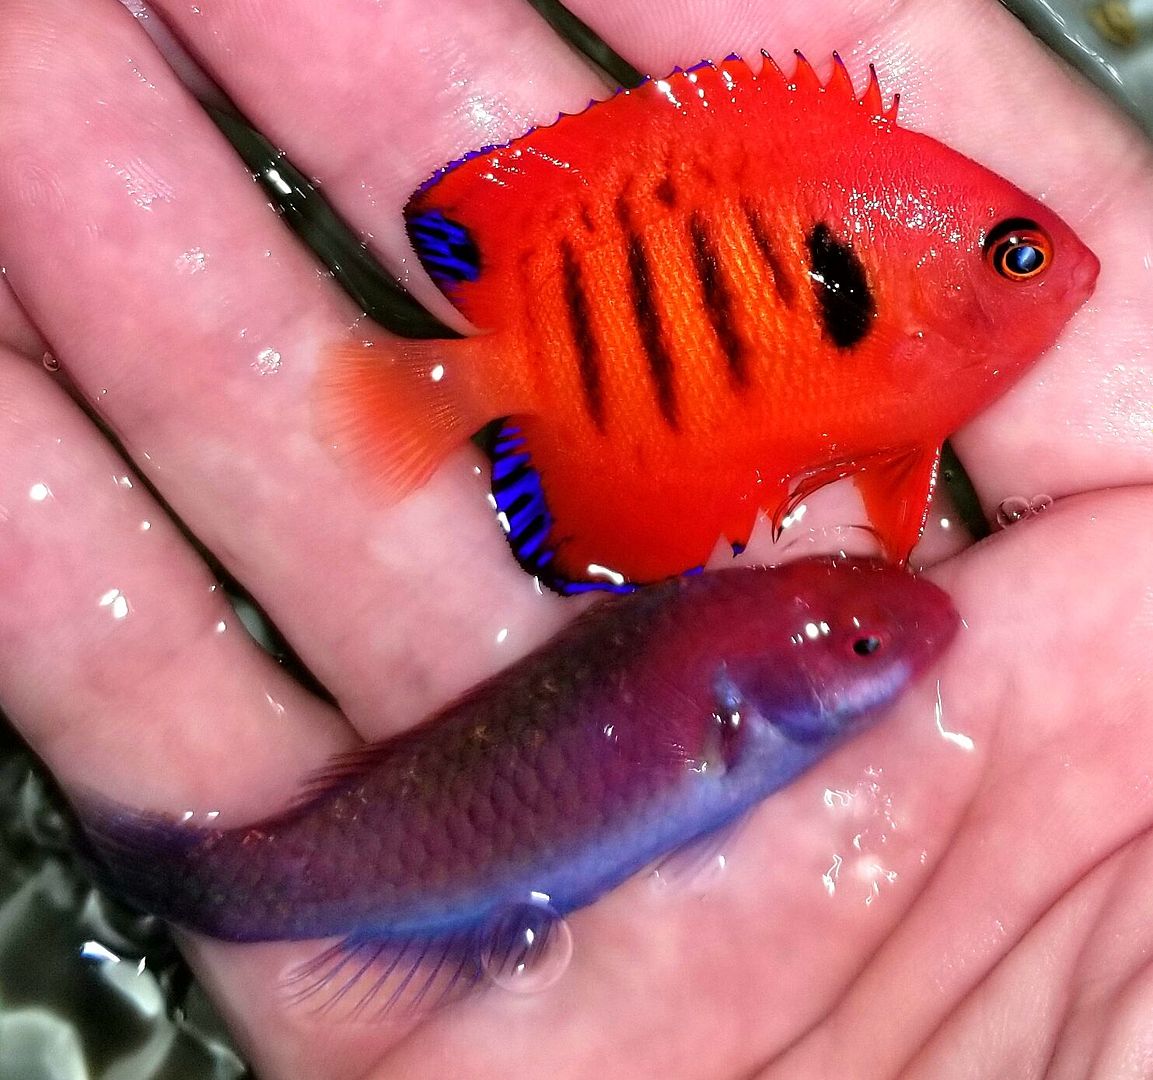 20170830 161100 zpsrfc9ofzu - Great New Fish! Flame Angels $39.99!!!